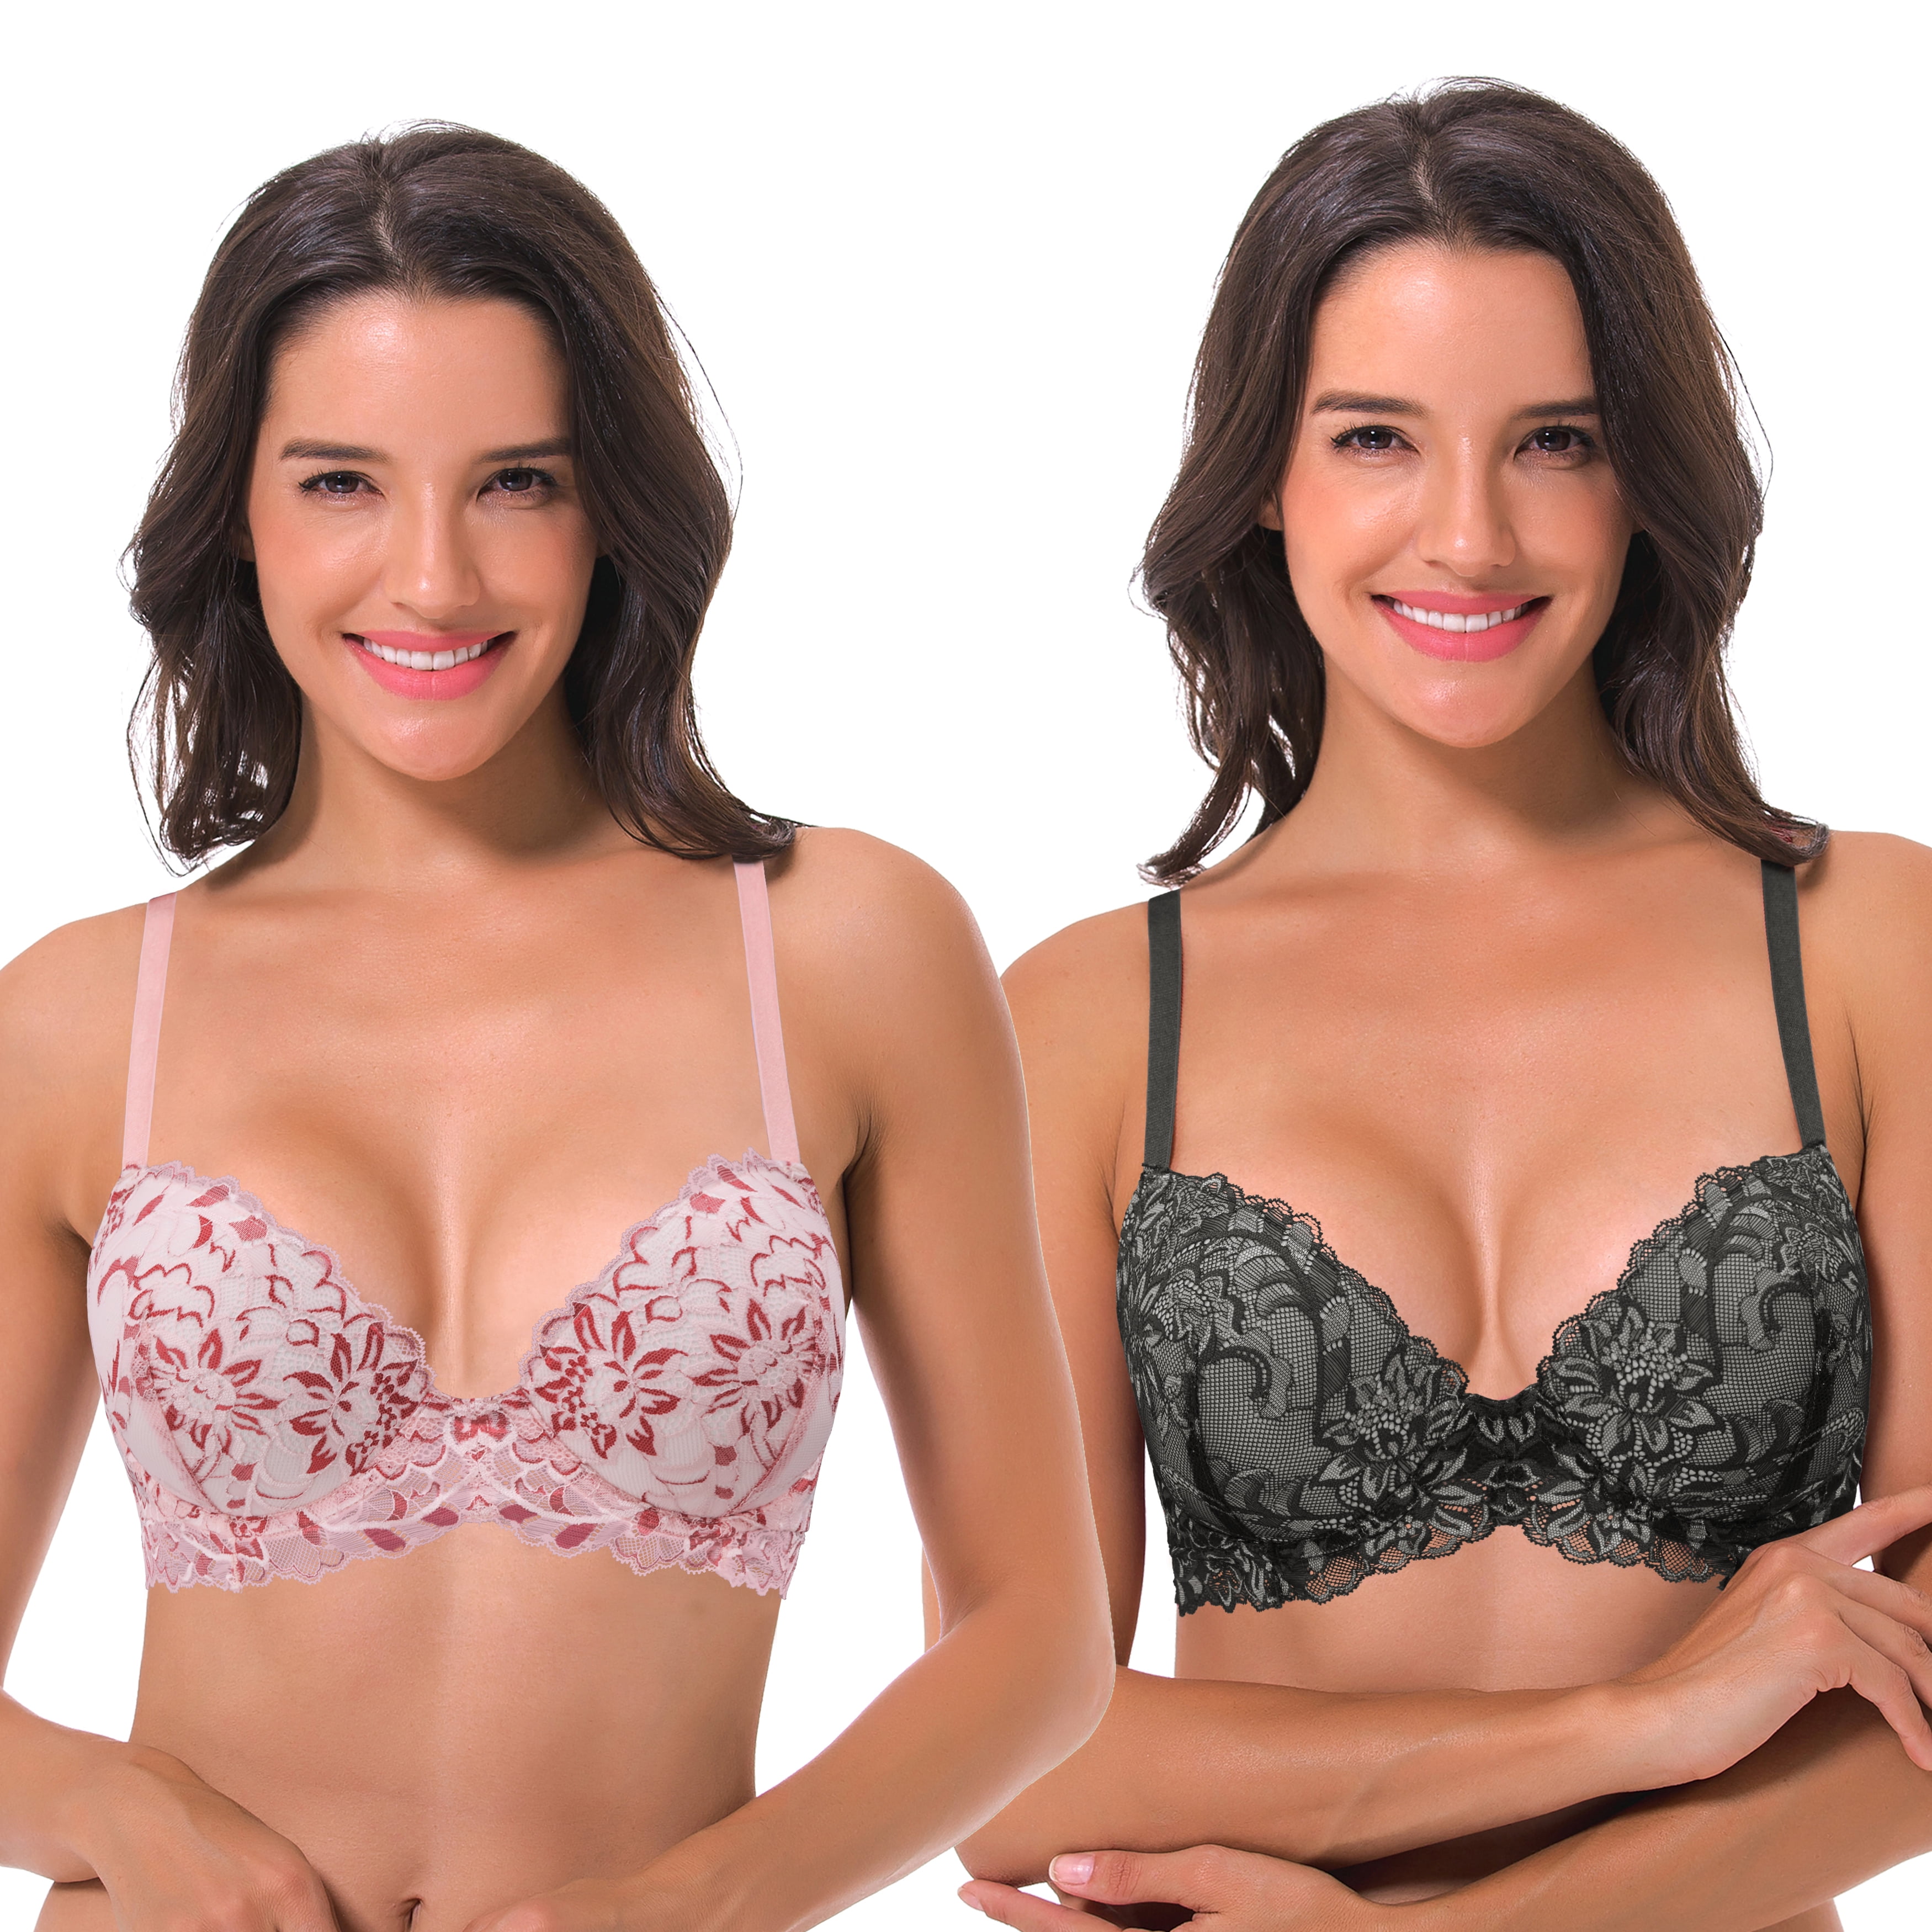 Curve Muse Women's Underwire Plus Size Push Up Add 1 and a Half Cup Lace  Bras-2PK-White/Red,Black/Grey-36D 